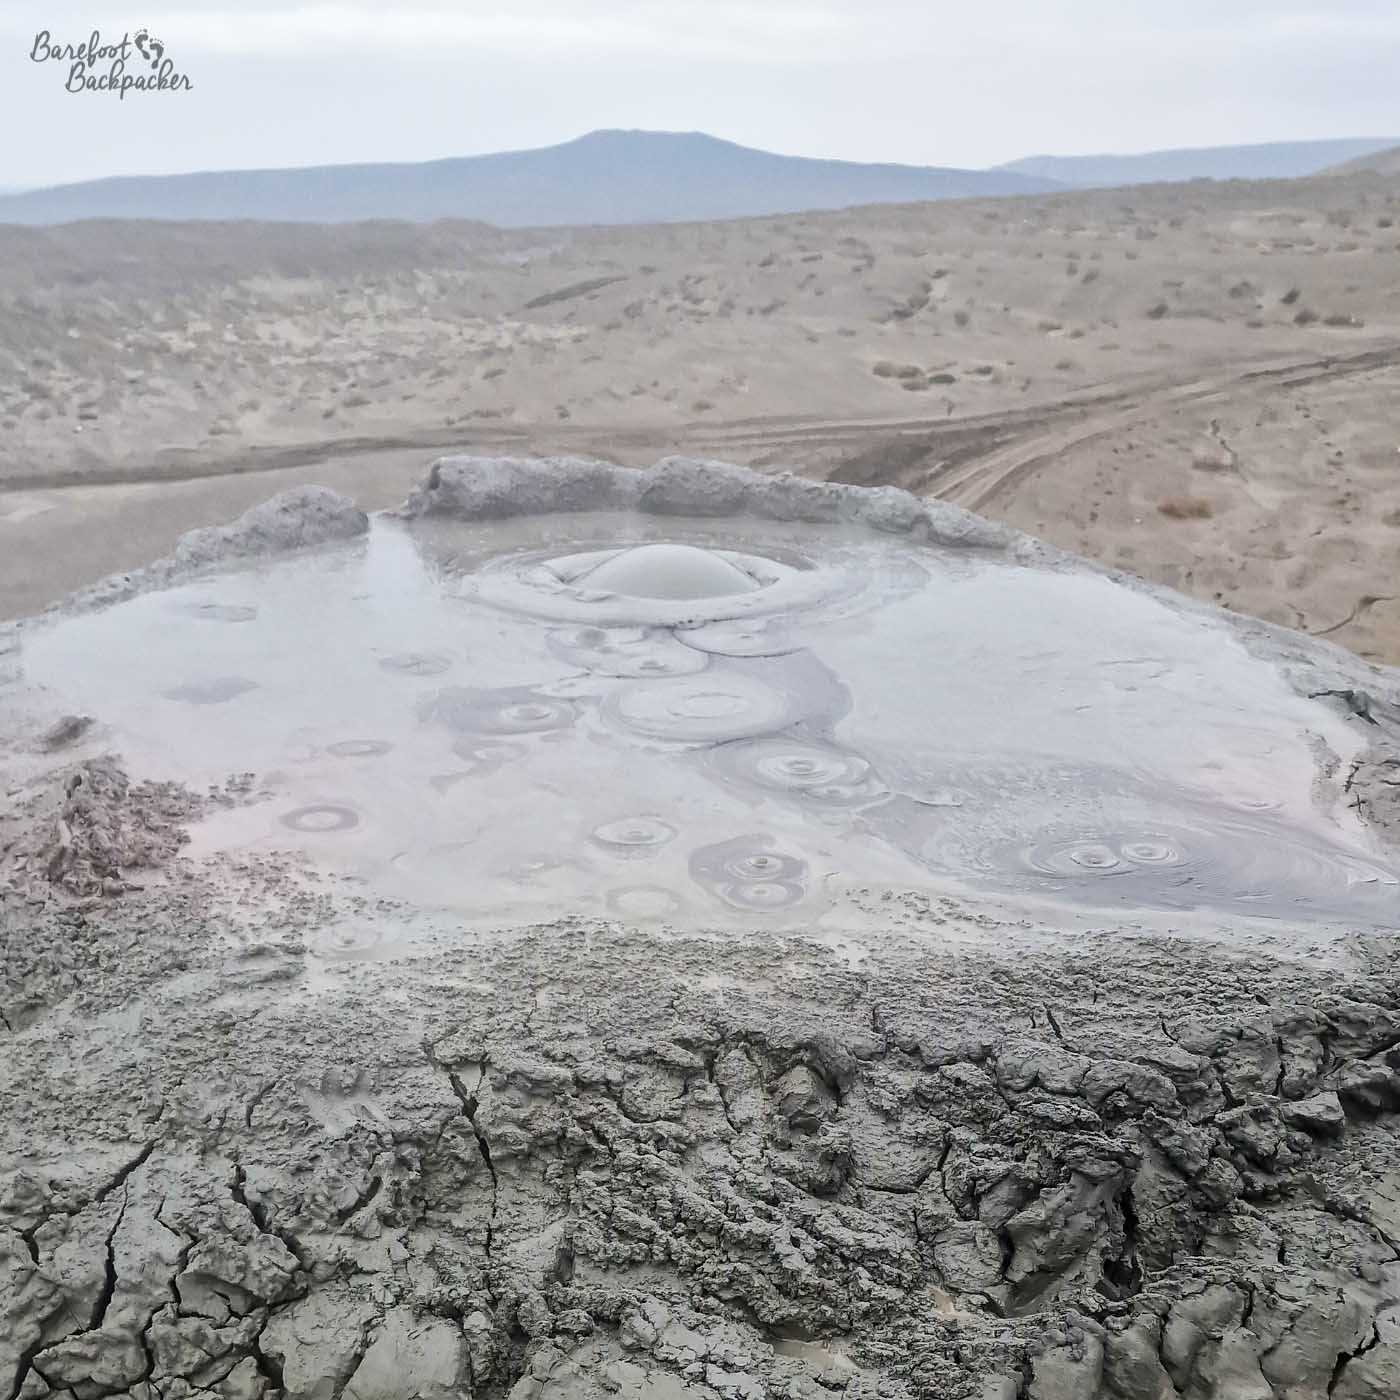 The rounded mound on top of a small hill. On it is a pool of grey, bubbling. mud. The landscape below in the background is quite flat and desolate.